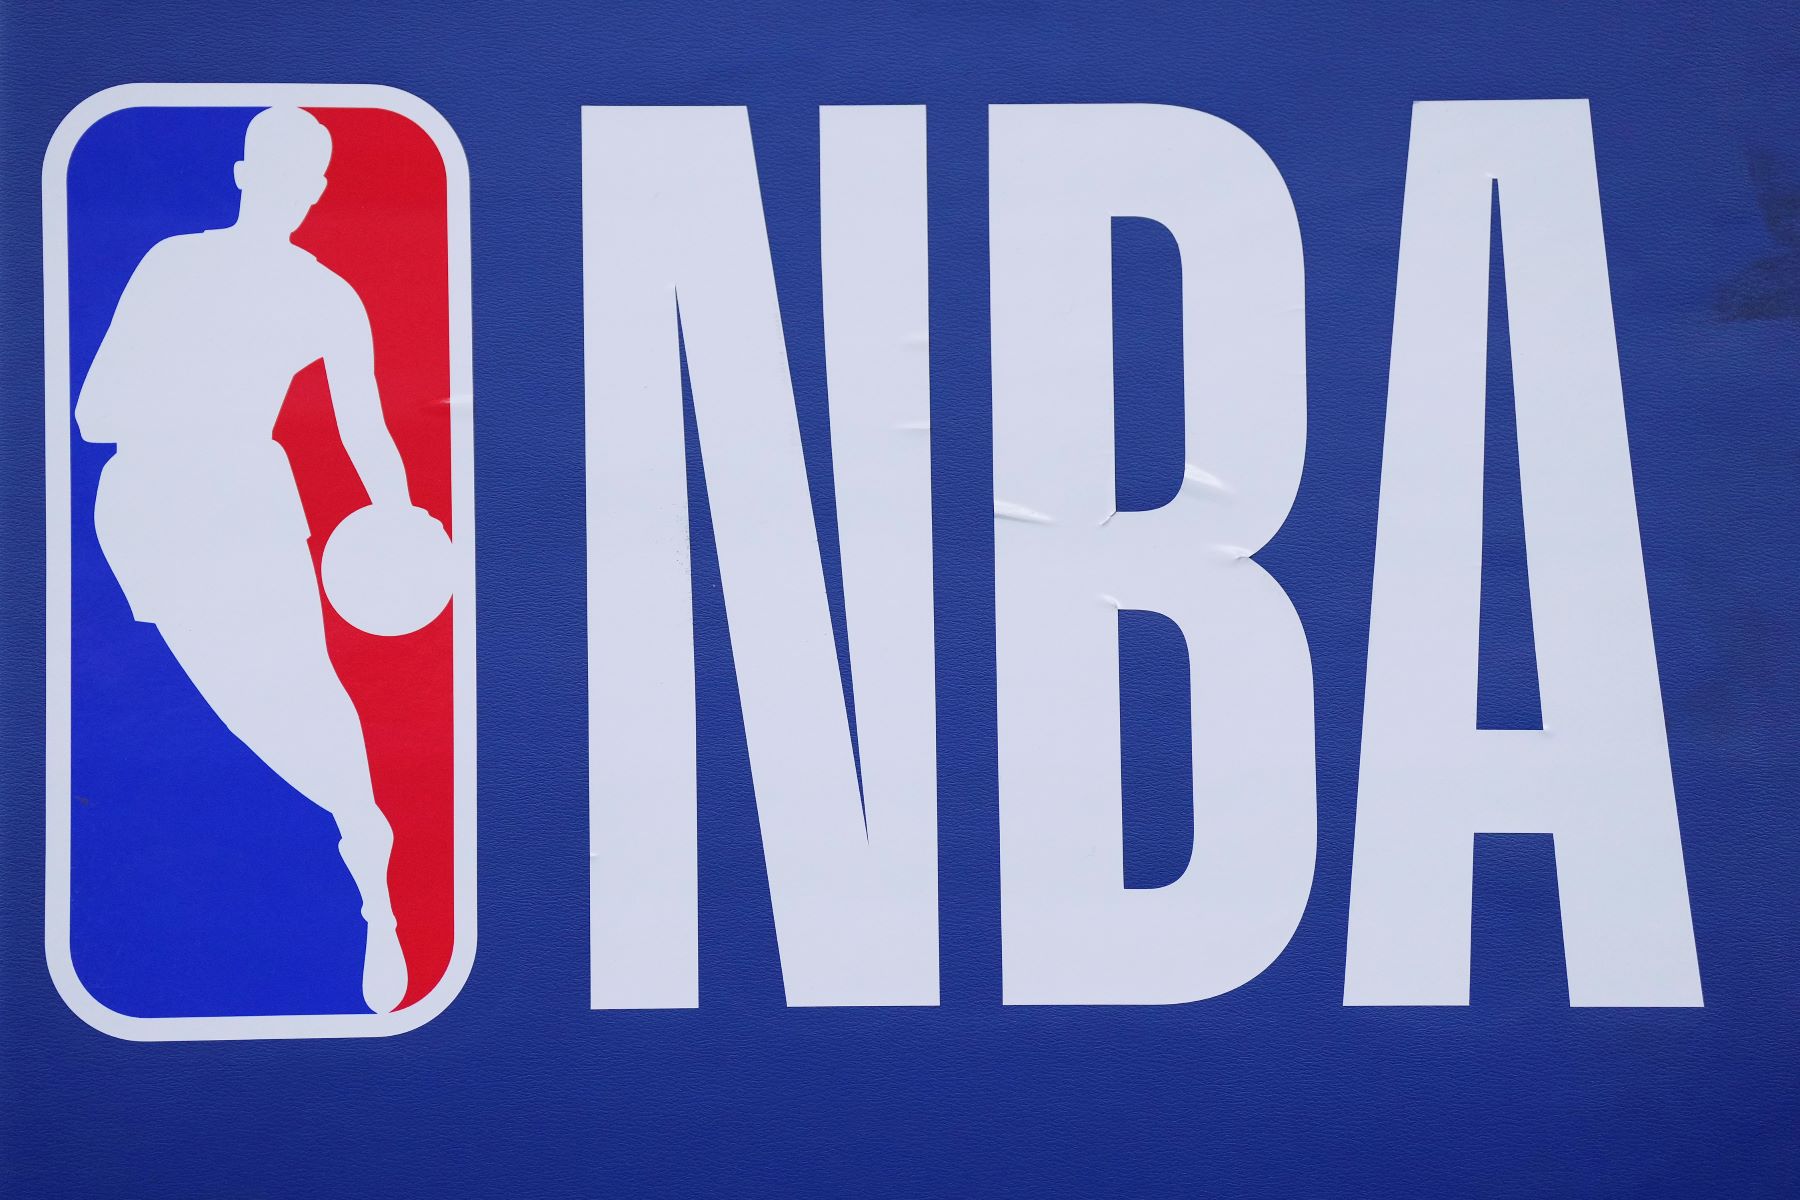 NBA logo seen during a 2022 NBA Playoffs game between the Miami Heat and Philadelphia 76ers